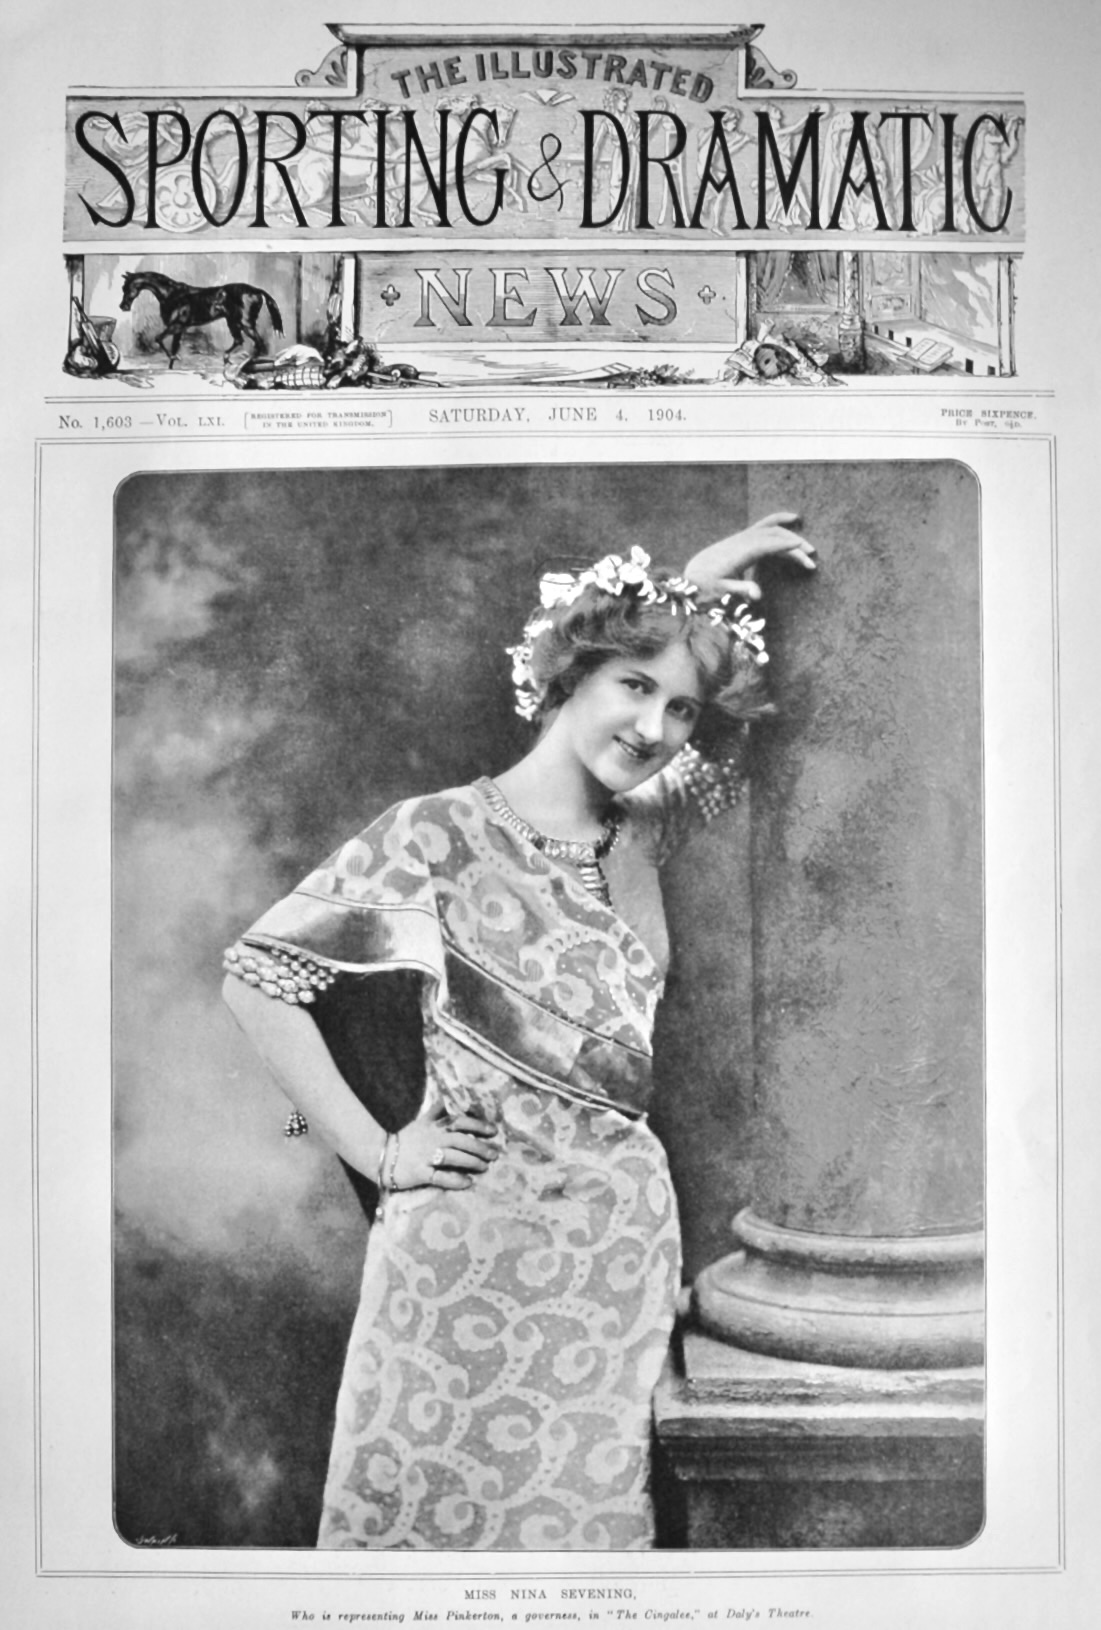 Miss Nina Evening, who is representing Miss Pinkerton, a governess, in 